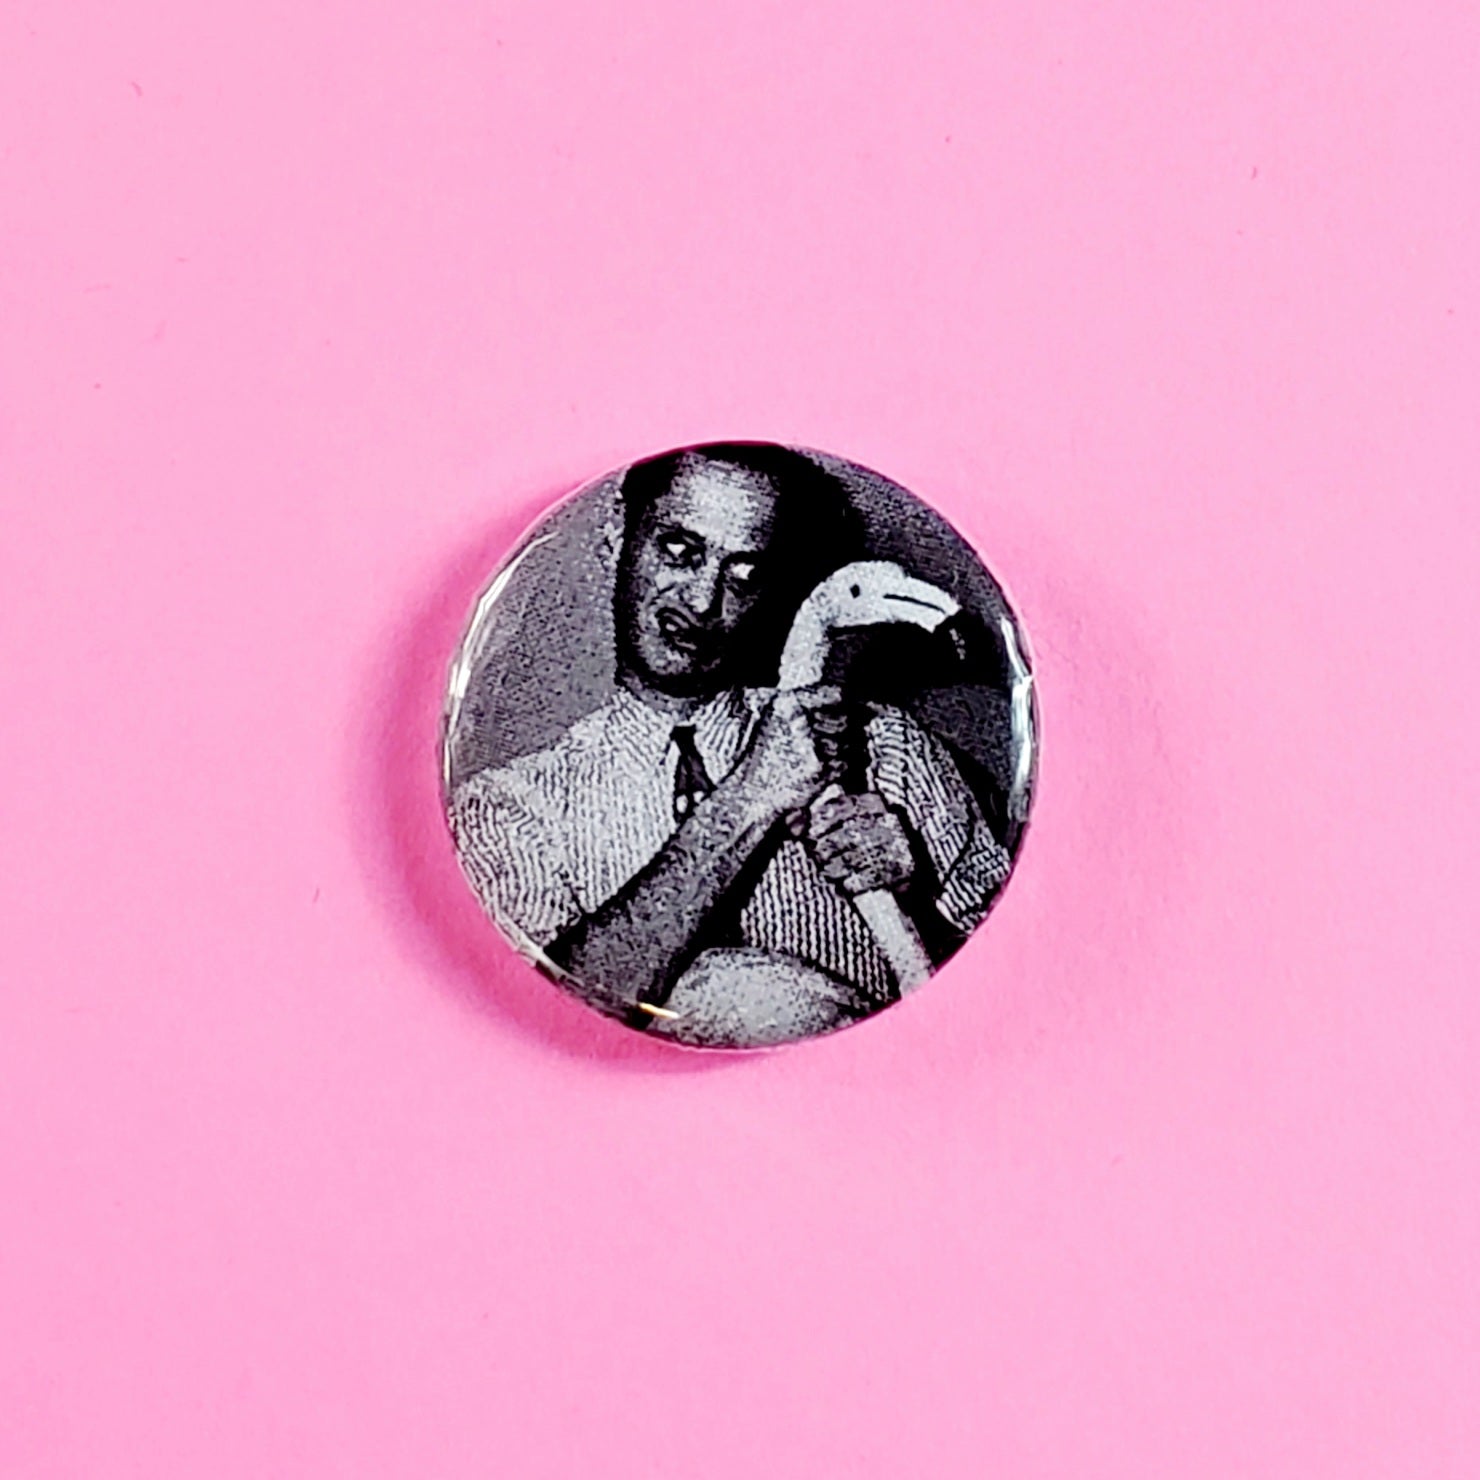 black and white photo of the Pope of Trash himself, John Waters, wrapping his hands around the neck of a (presumably pink) plastic flamingo on a 1” round pinback button